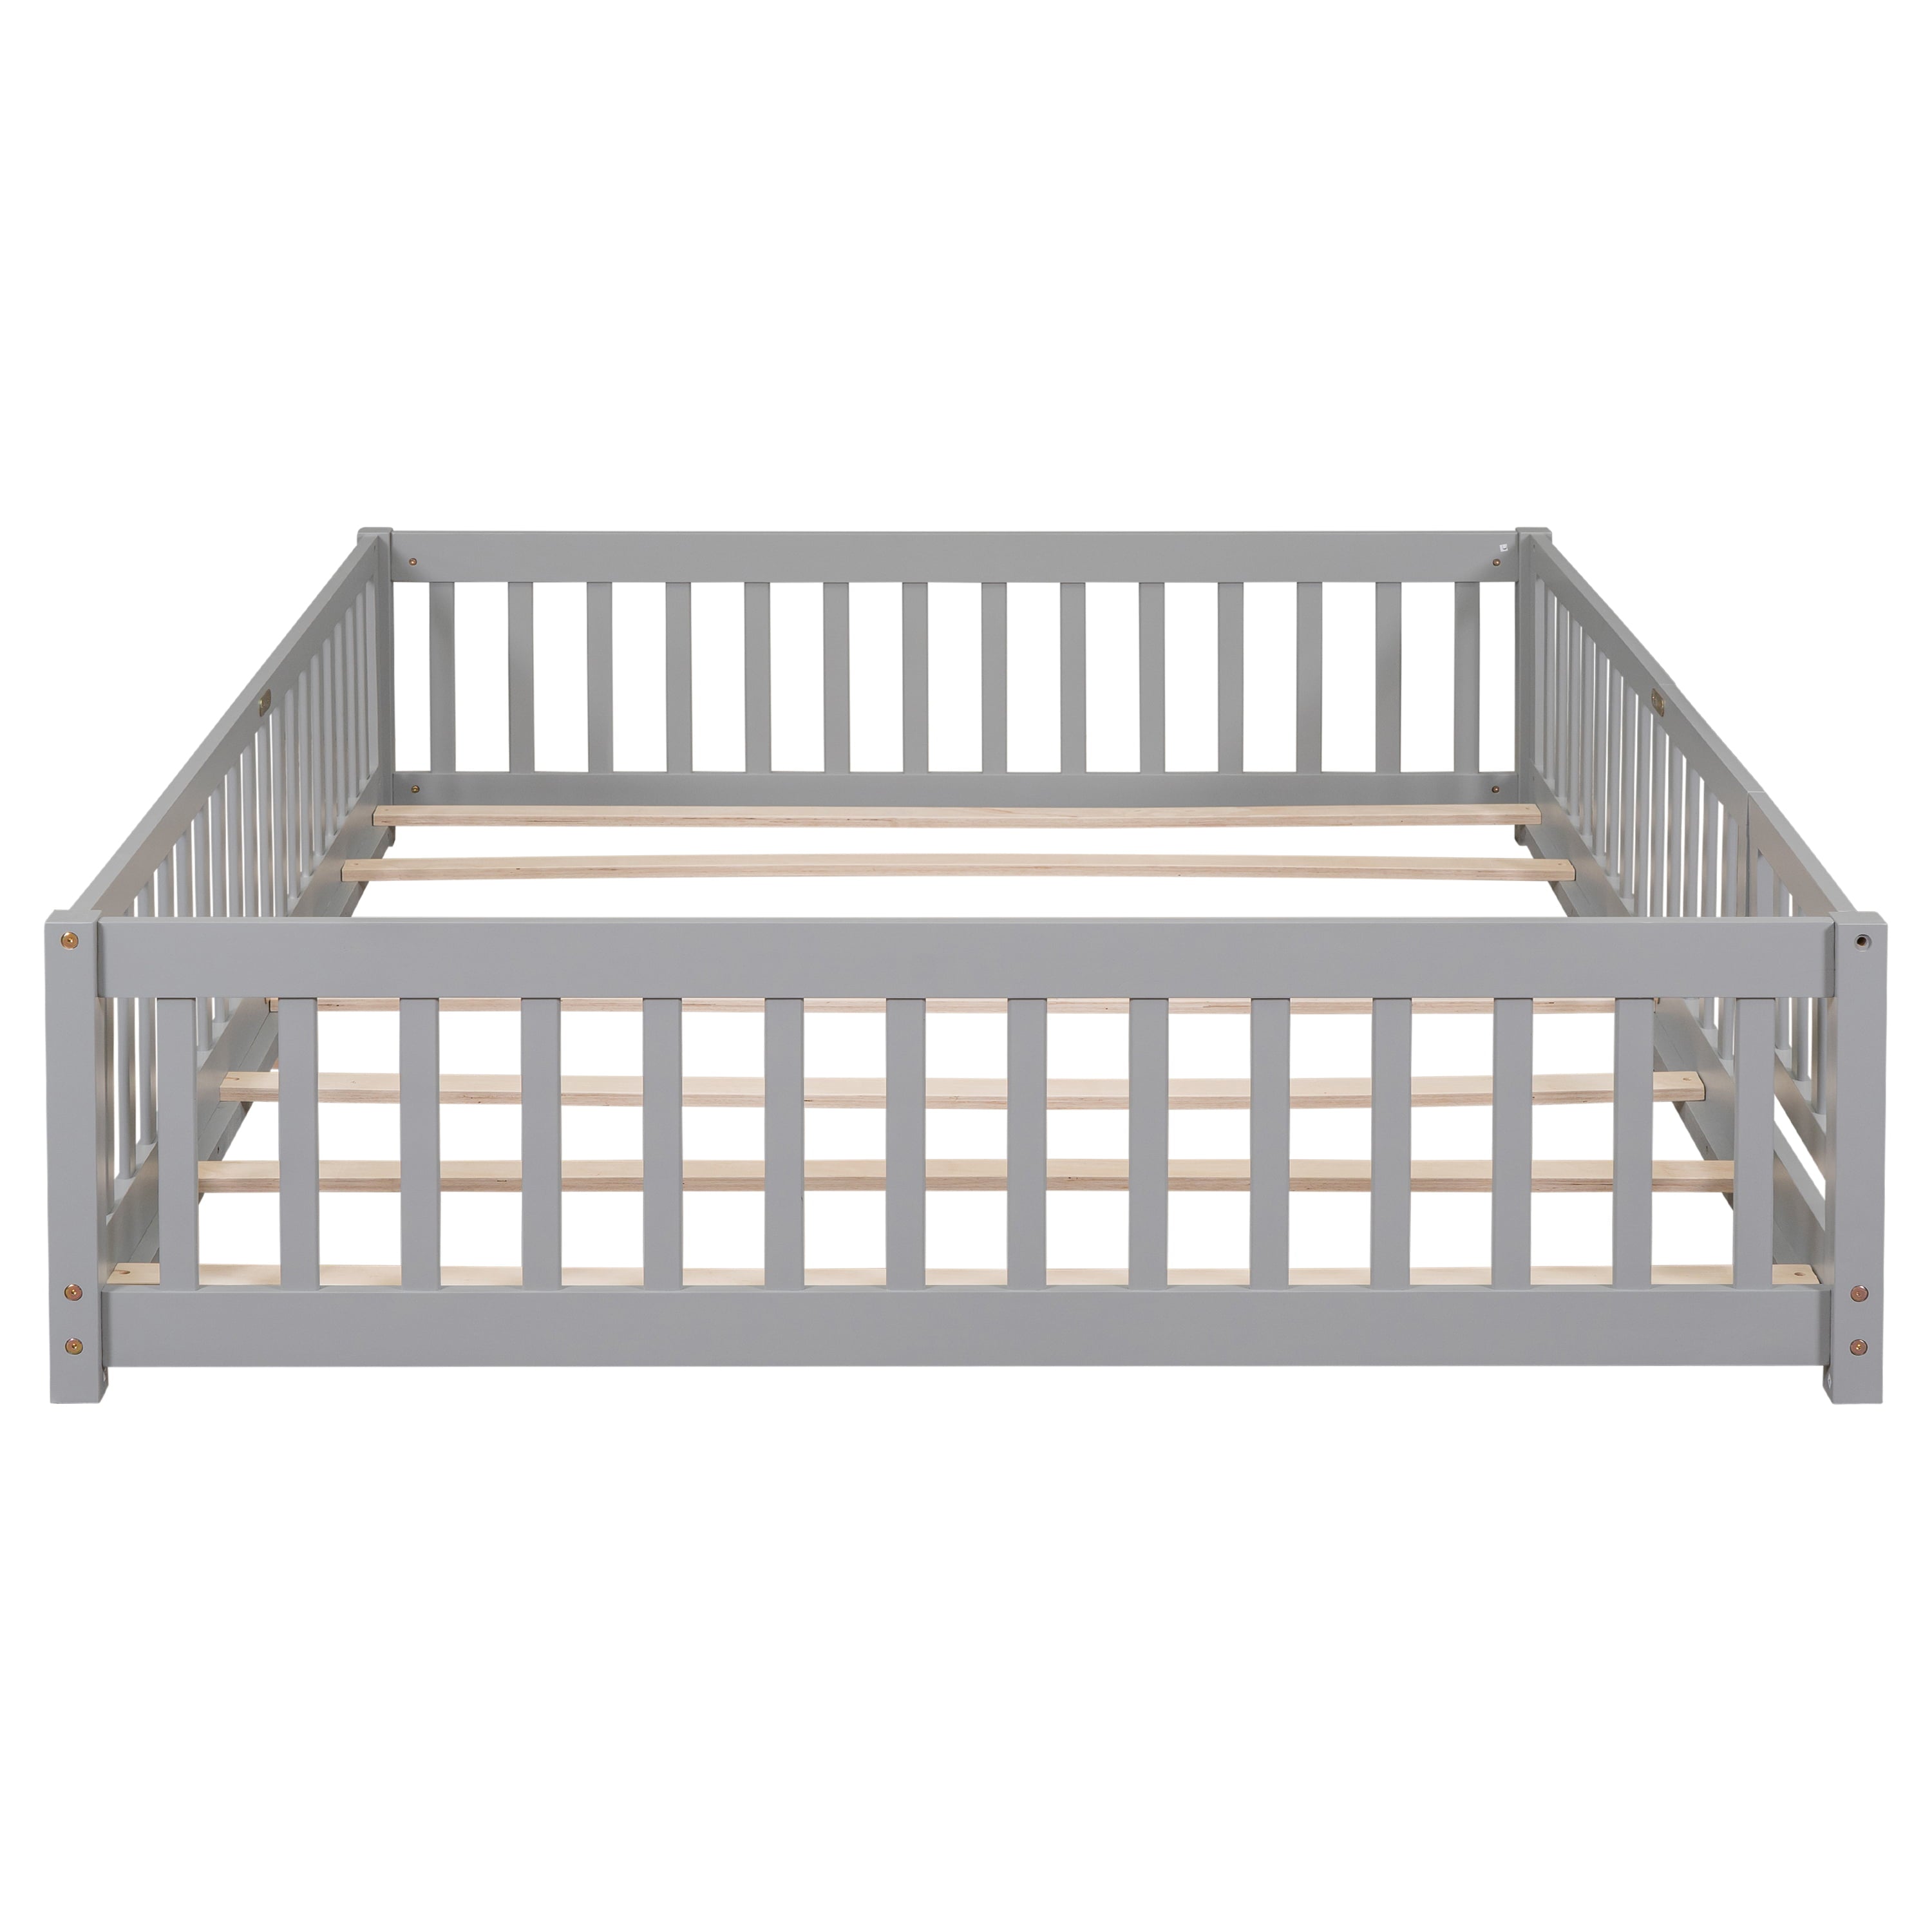 uhomepro Queen Size Wood Floor Bed Frame with Fence and Door for Kids, Toddlers, Gray